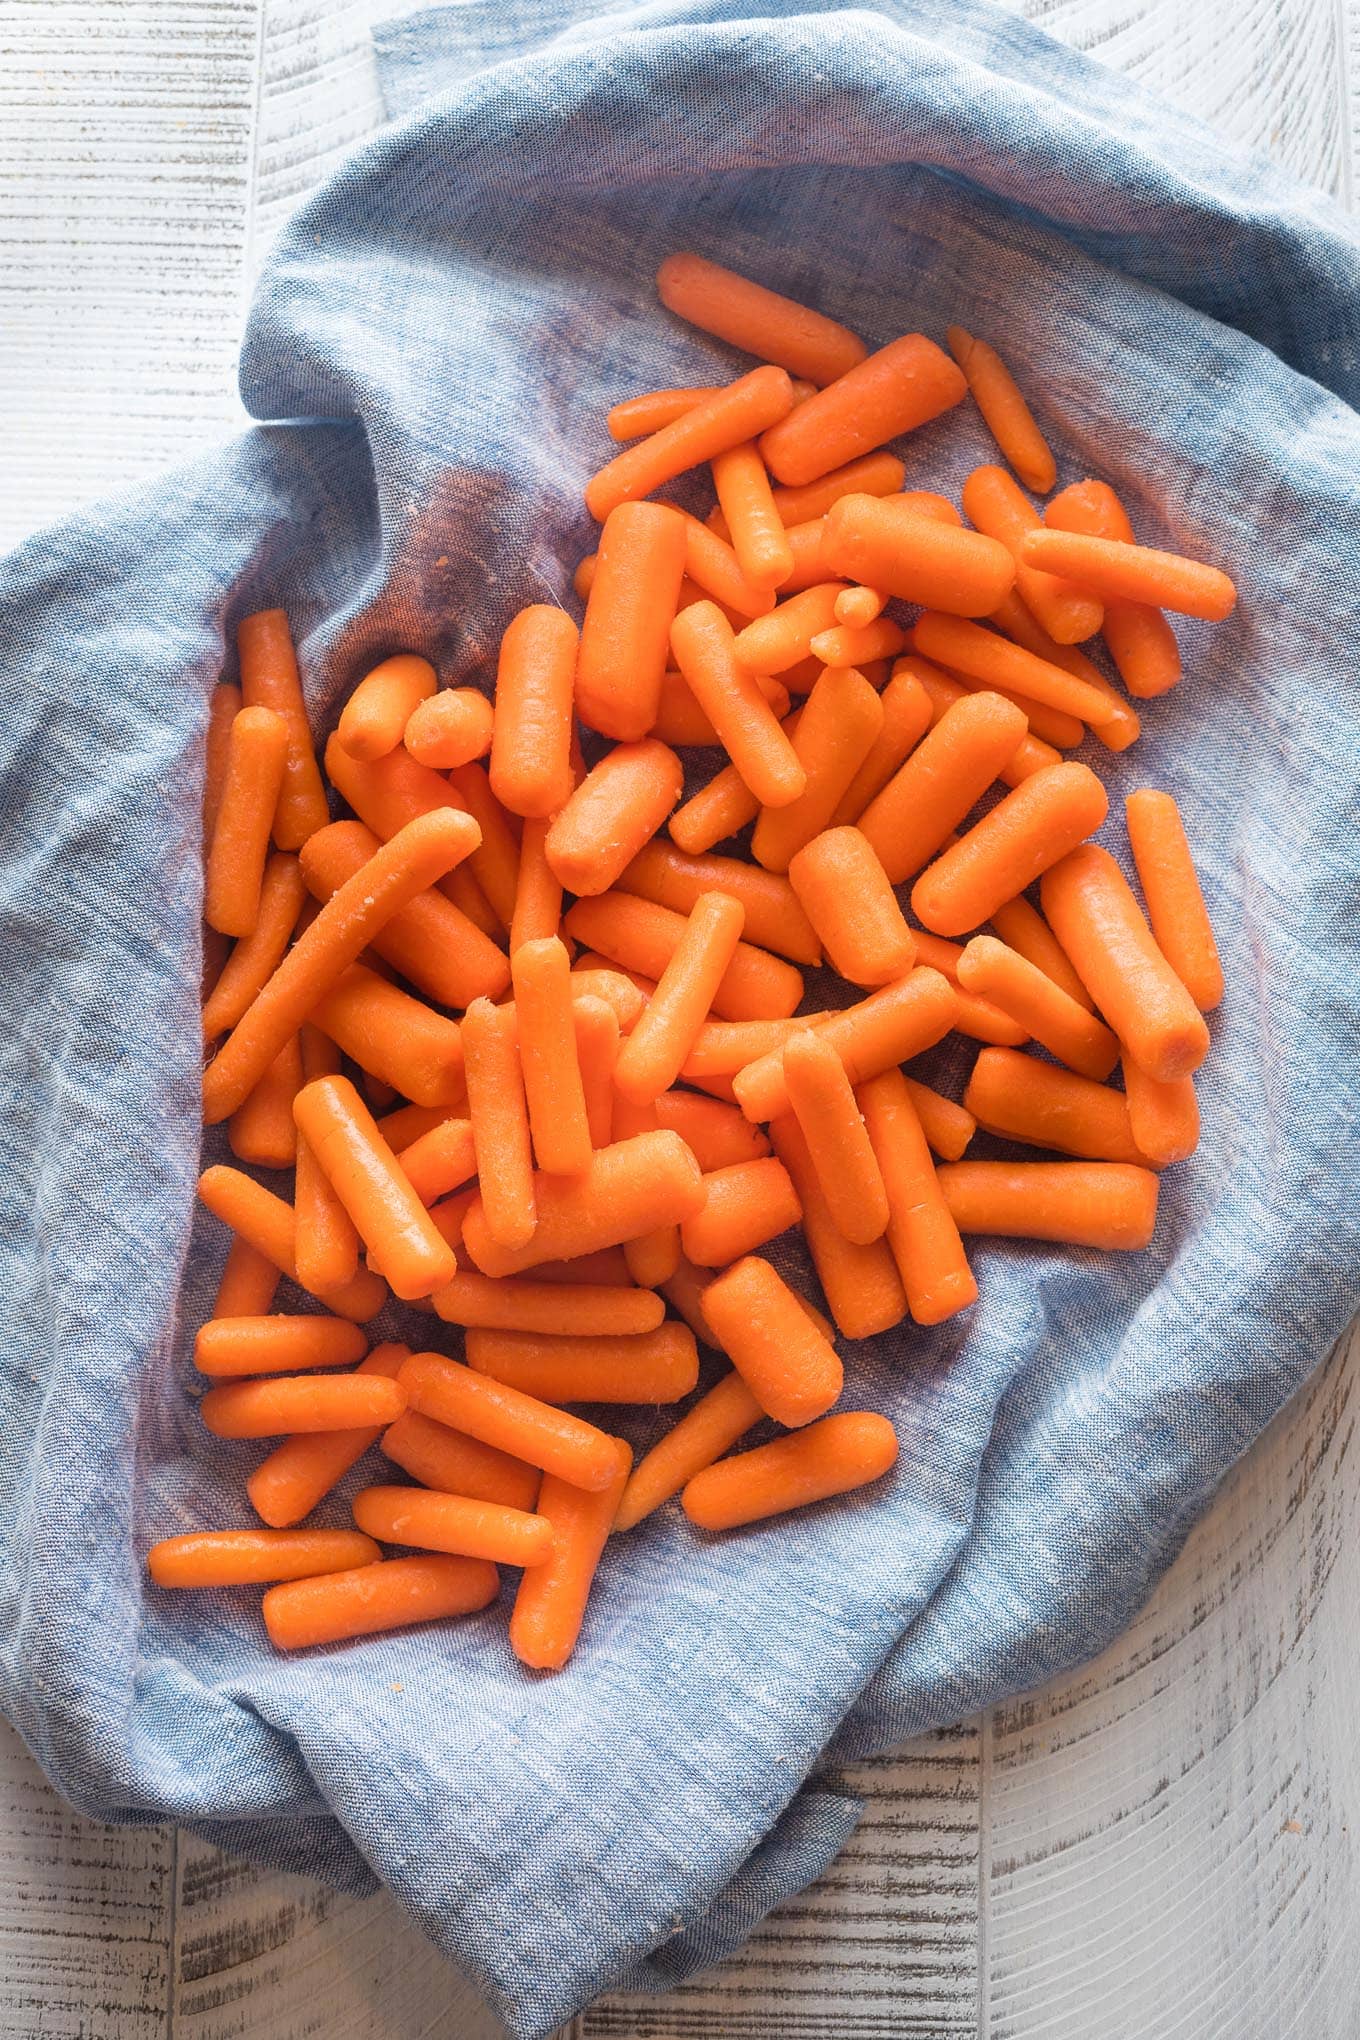 Baby cut carrots being rubbed dry in a blue kitchen towel.